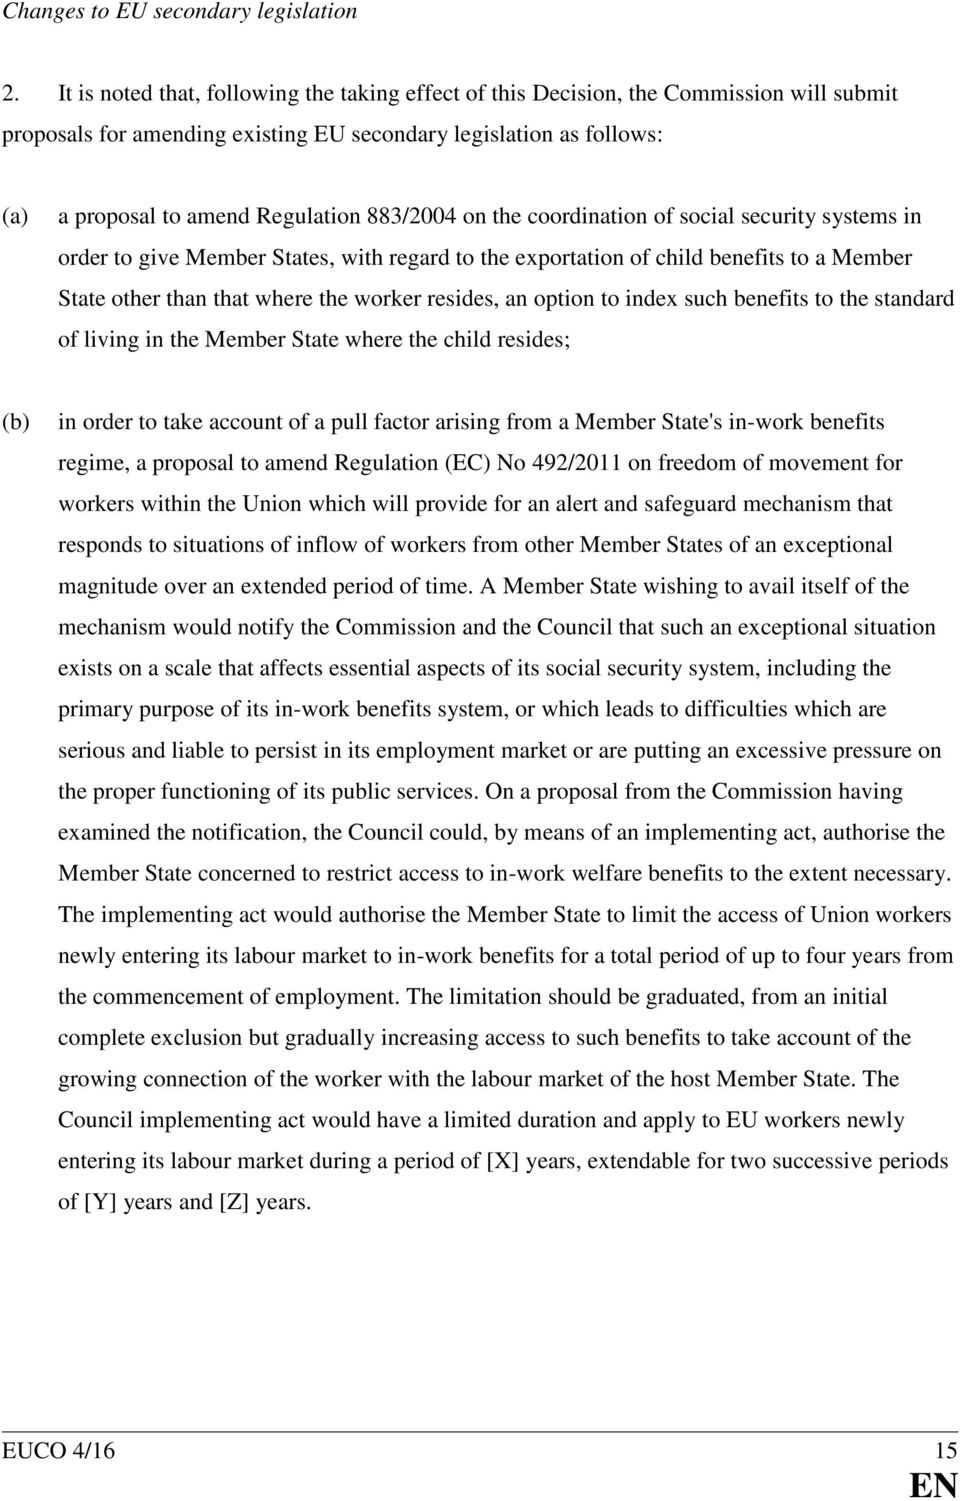 883/2004 on the coordination of social security systems in order to give Member States, with regard to the exportation of child benefits to a Member State other than that where the worker resides, an